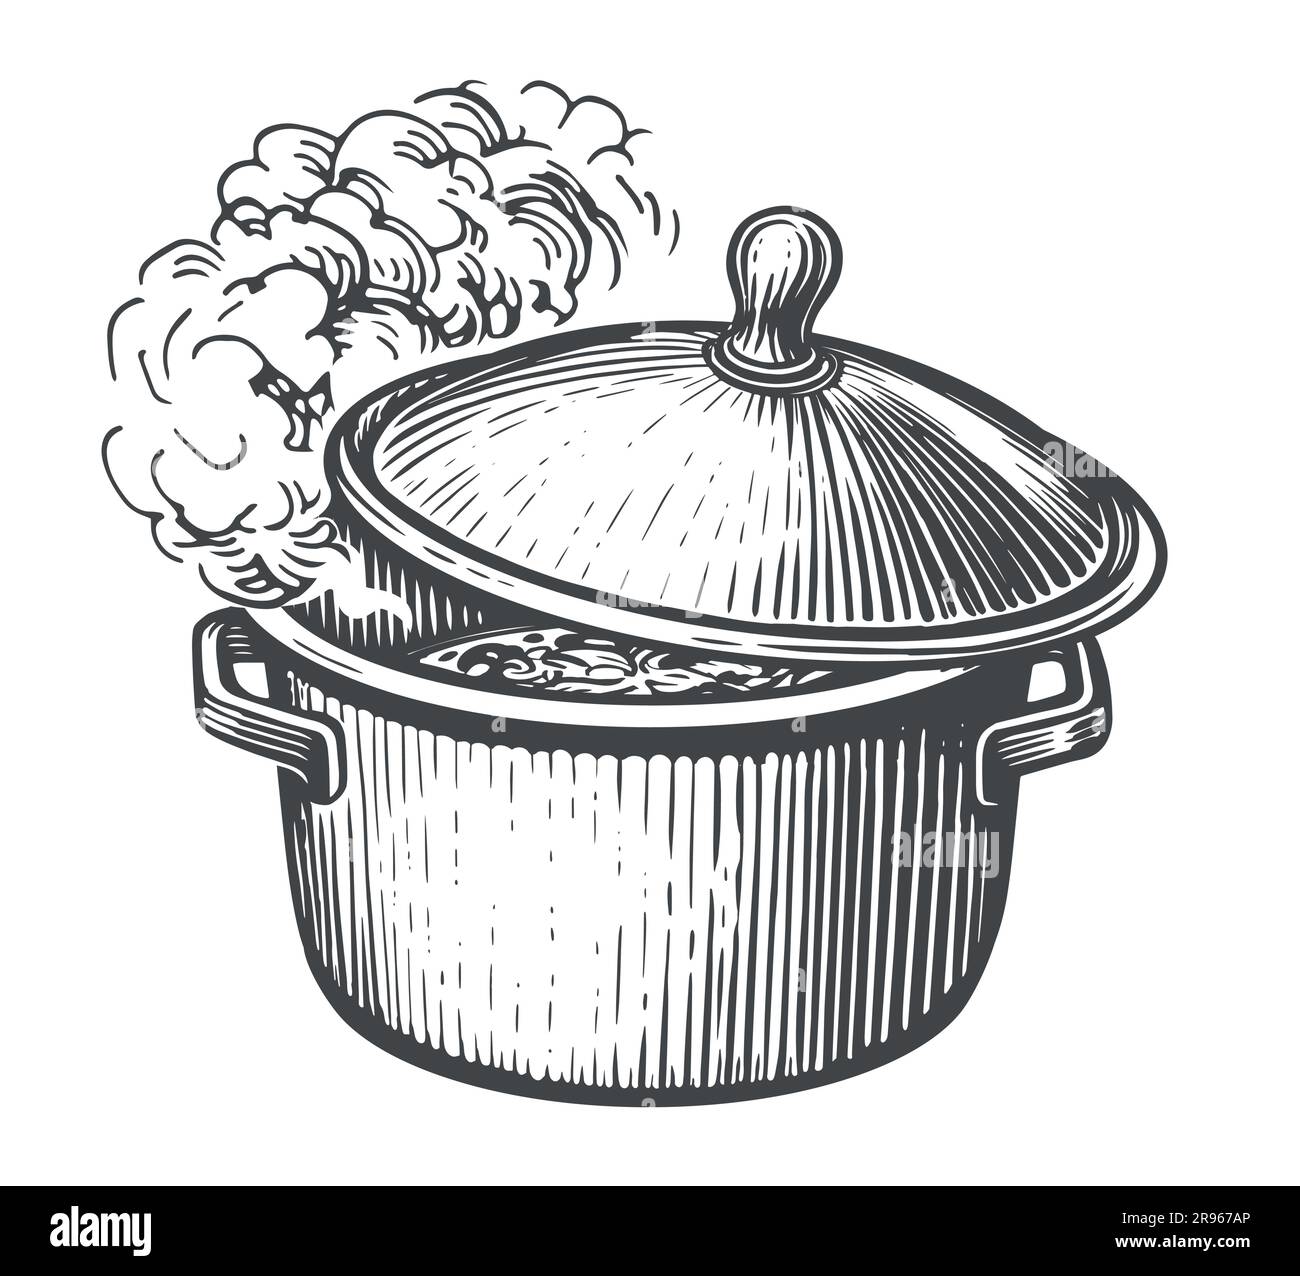 Pot with boiling soup or sauce, saucepan with open lid. Cooking